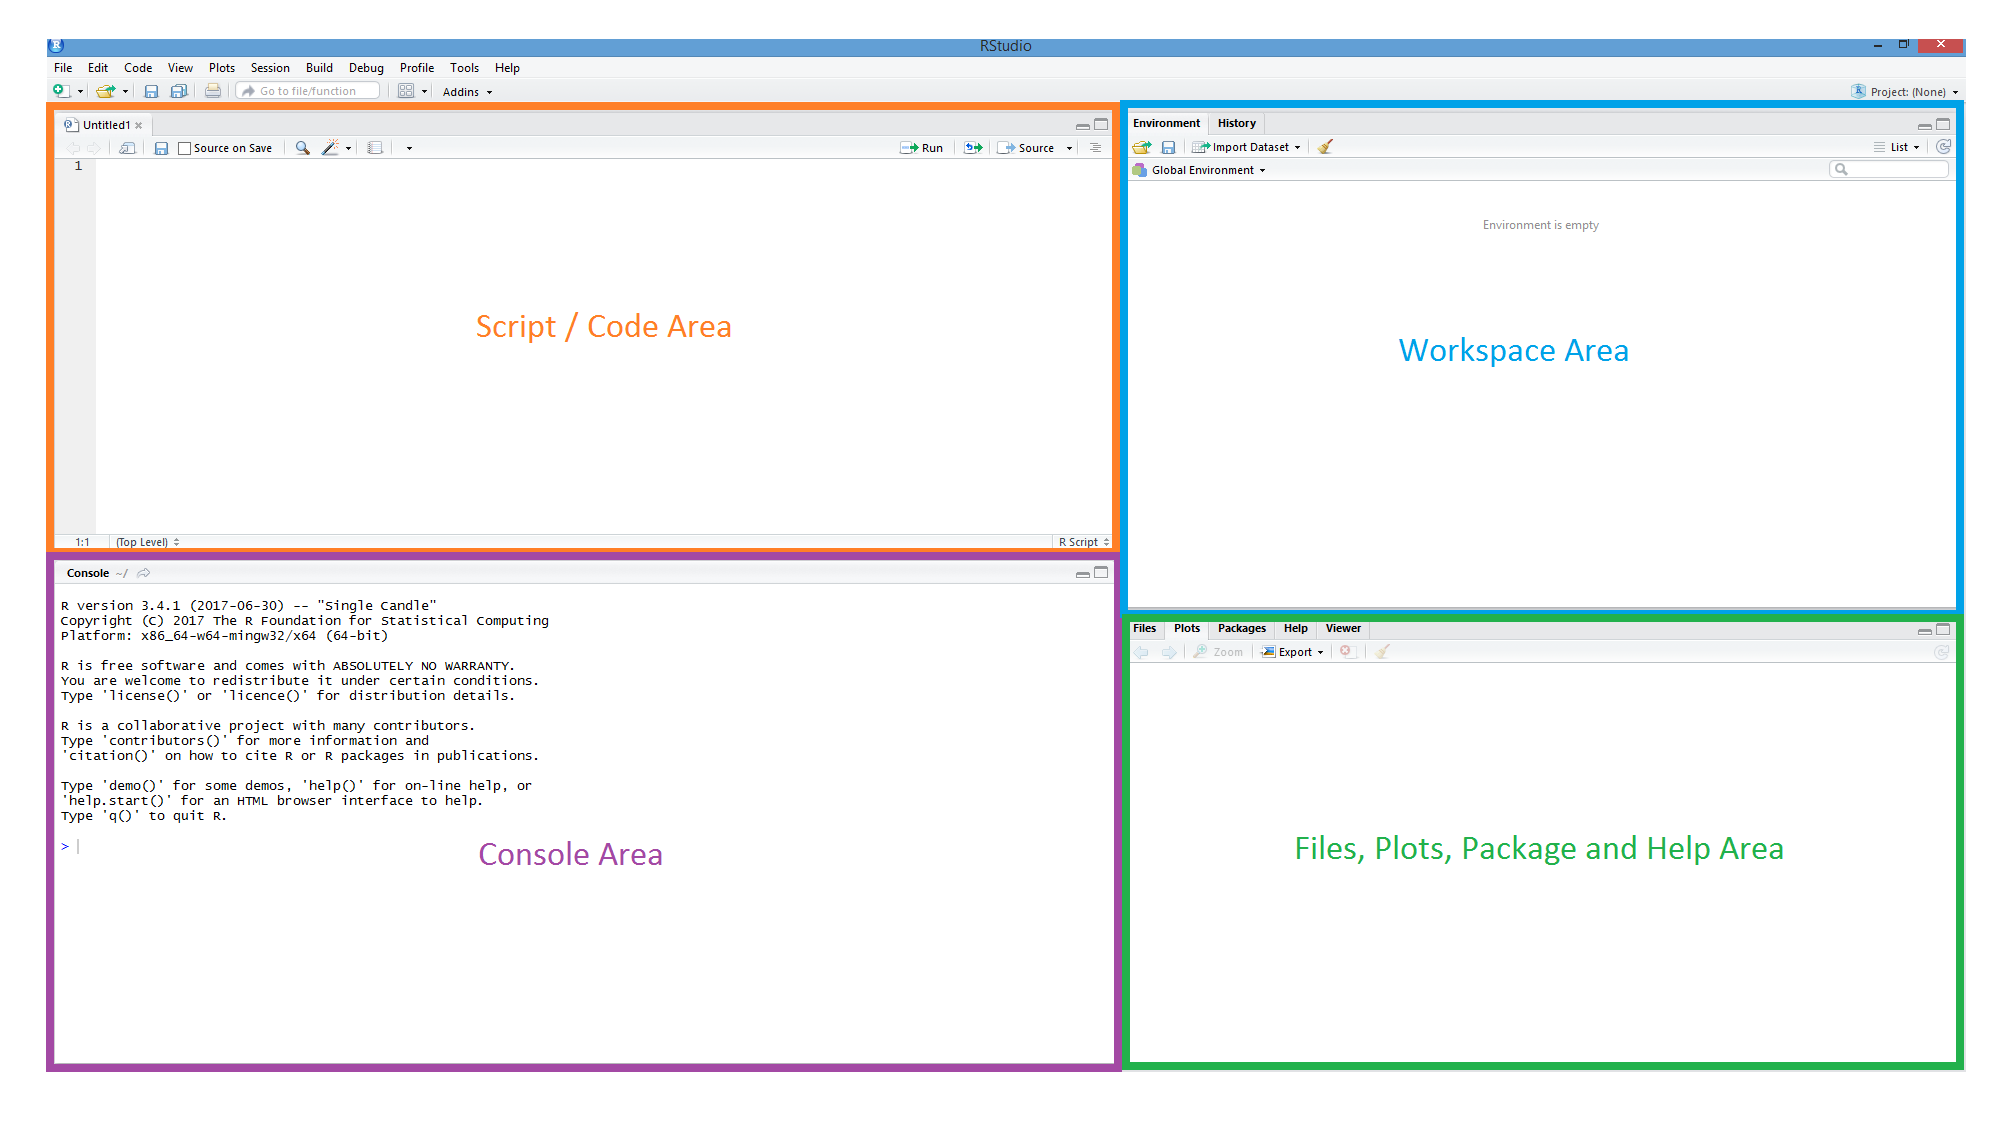 Screenshot of RStudio, with four panes highlighted. Top left: the script or code area. Top right: the workspace area. Bottom left: the console area. Bottom right: area where files, plots, packages and help can be displayed.